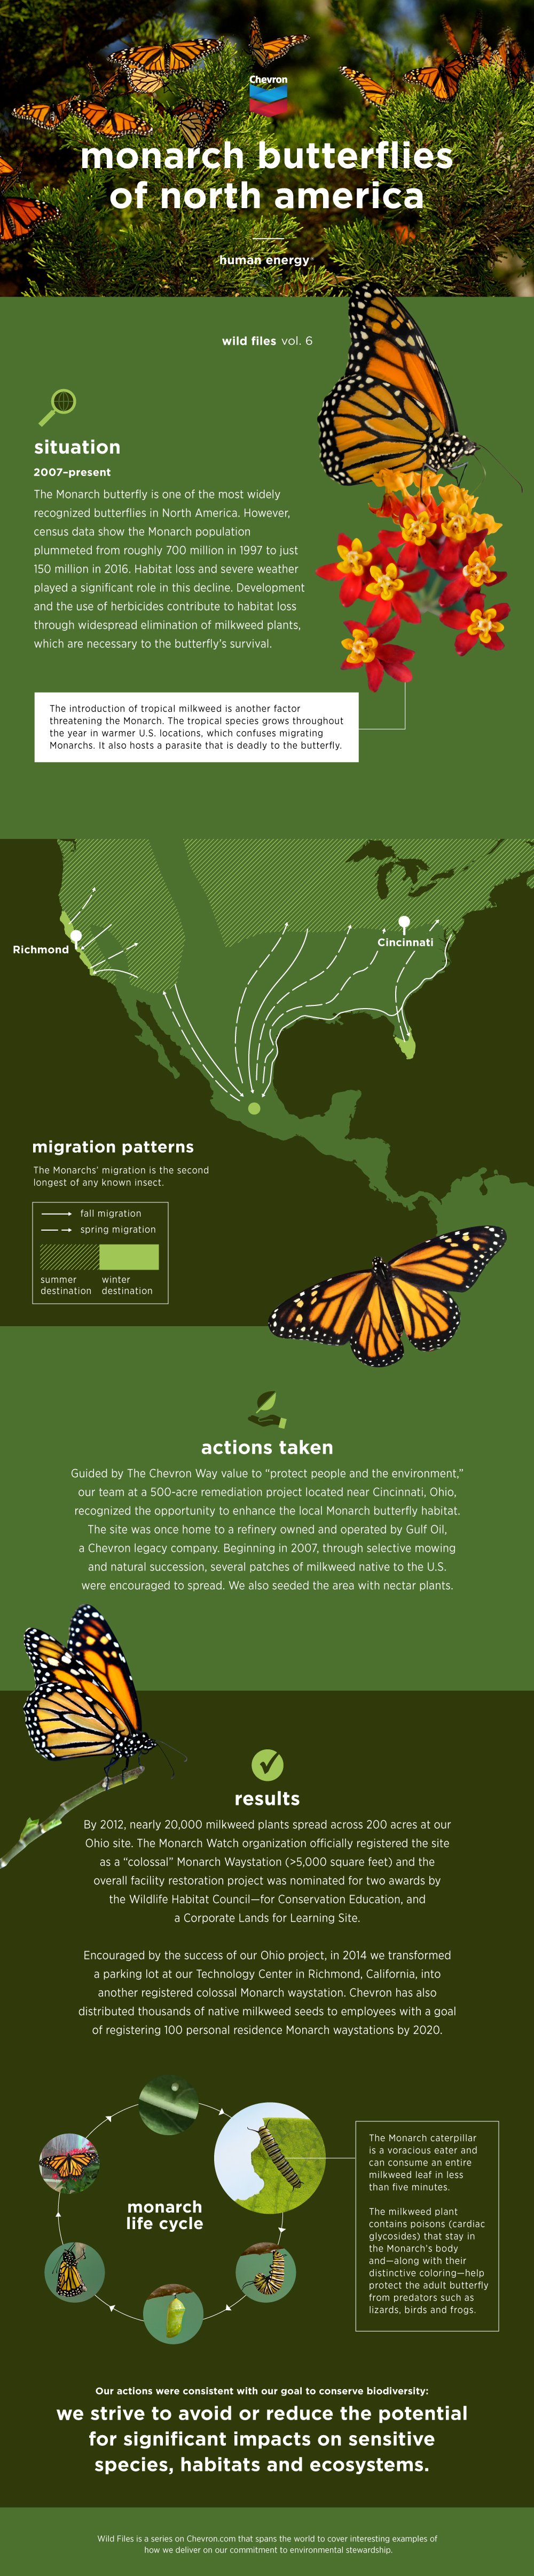 Wild Files: Monarch Butterflies of North America